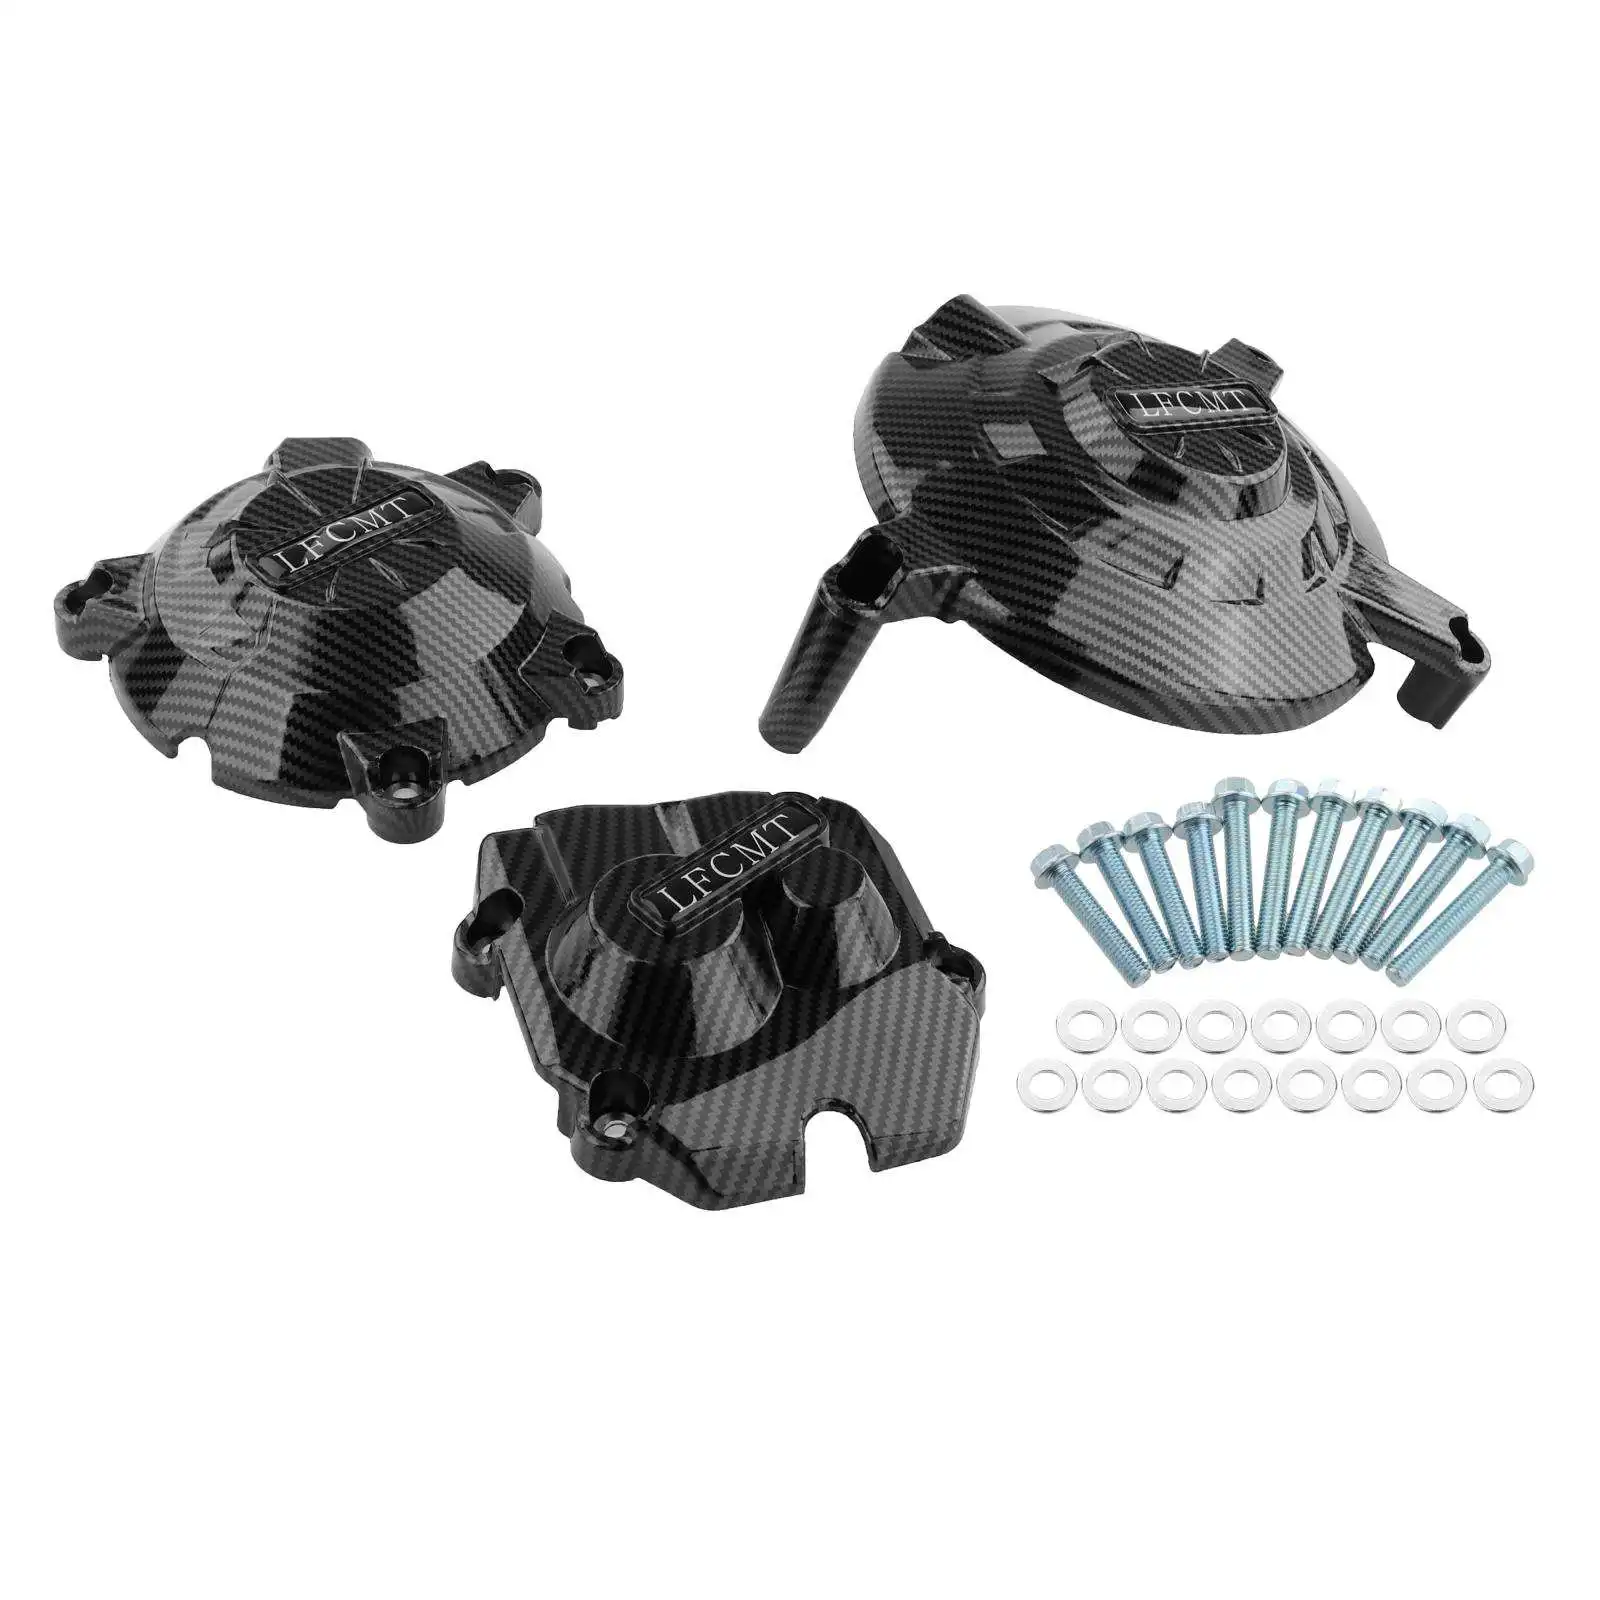 Secondary Engine Protective Covers Set Engine Black Guard Crankcase Protector Cover Fits for Kawasaki Ninja ZX10R 2011-2019